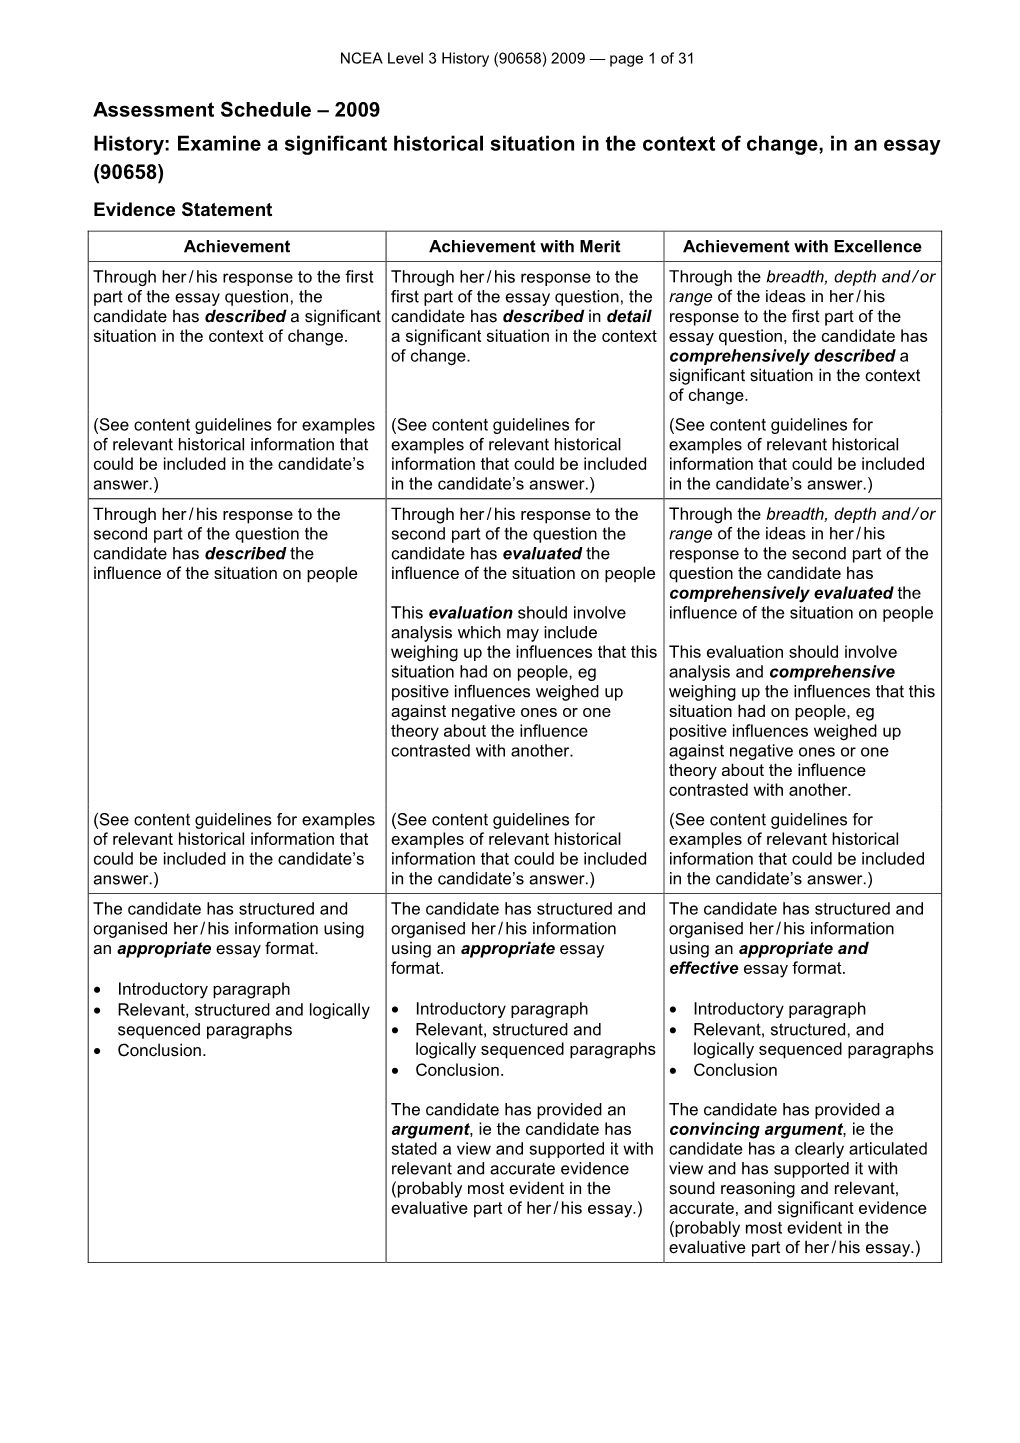 Assessment Schedule – 2009 History: Examine a Significant Historical Situation in the Context of Change, in an Essay (90658) Evidence Statement